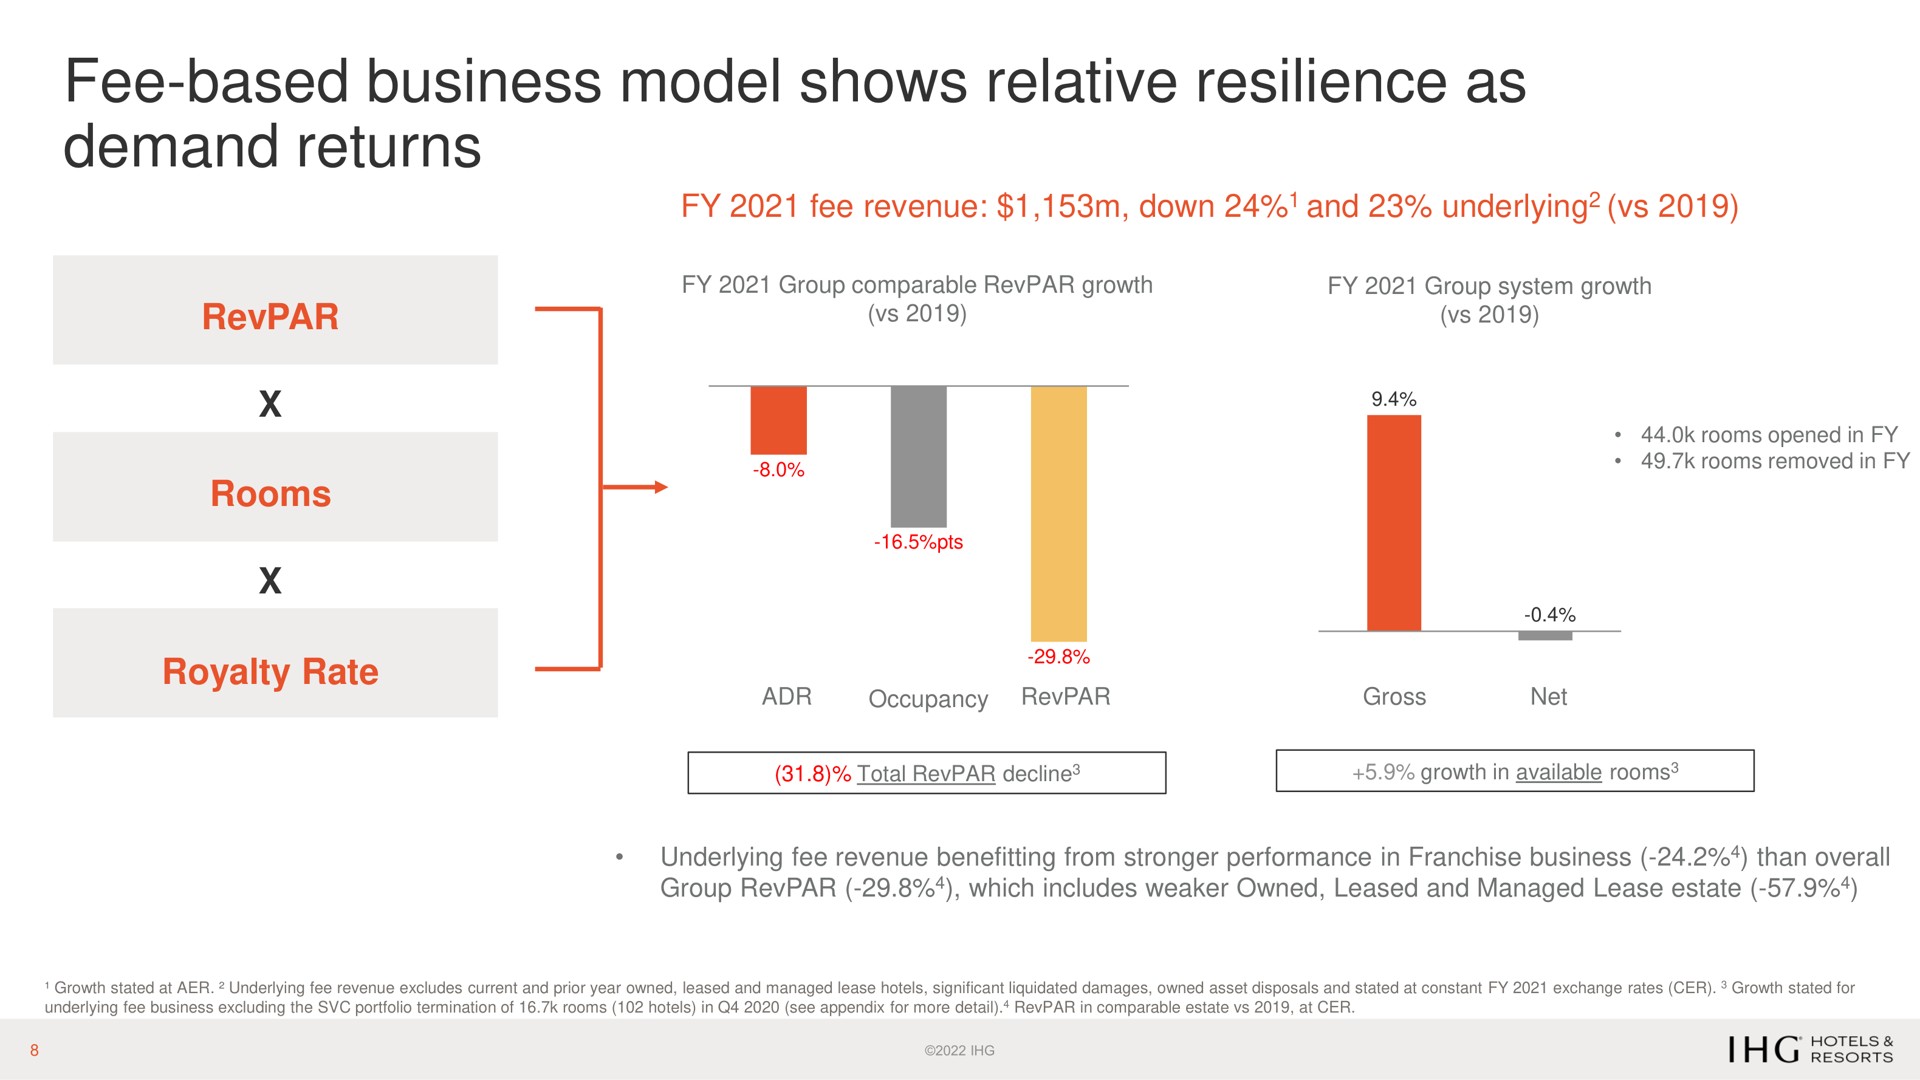 fee based business model shows relative resilience as demand returns | IHG Hotels